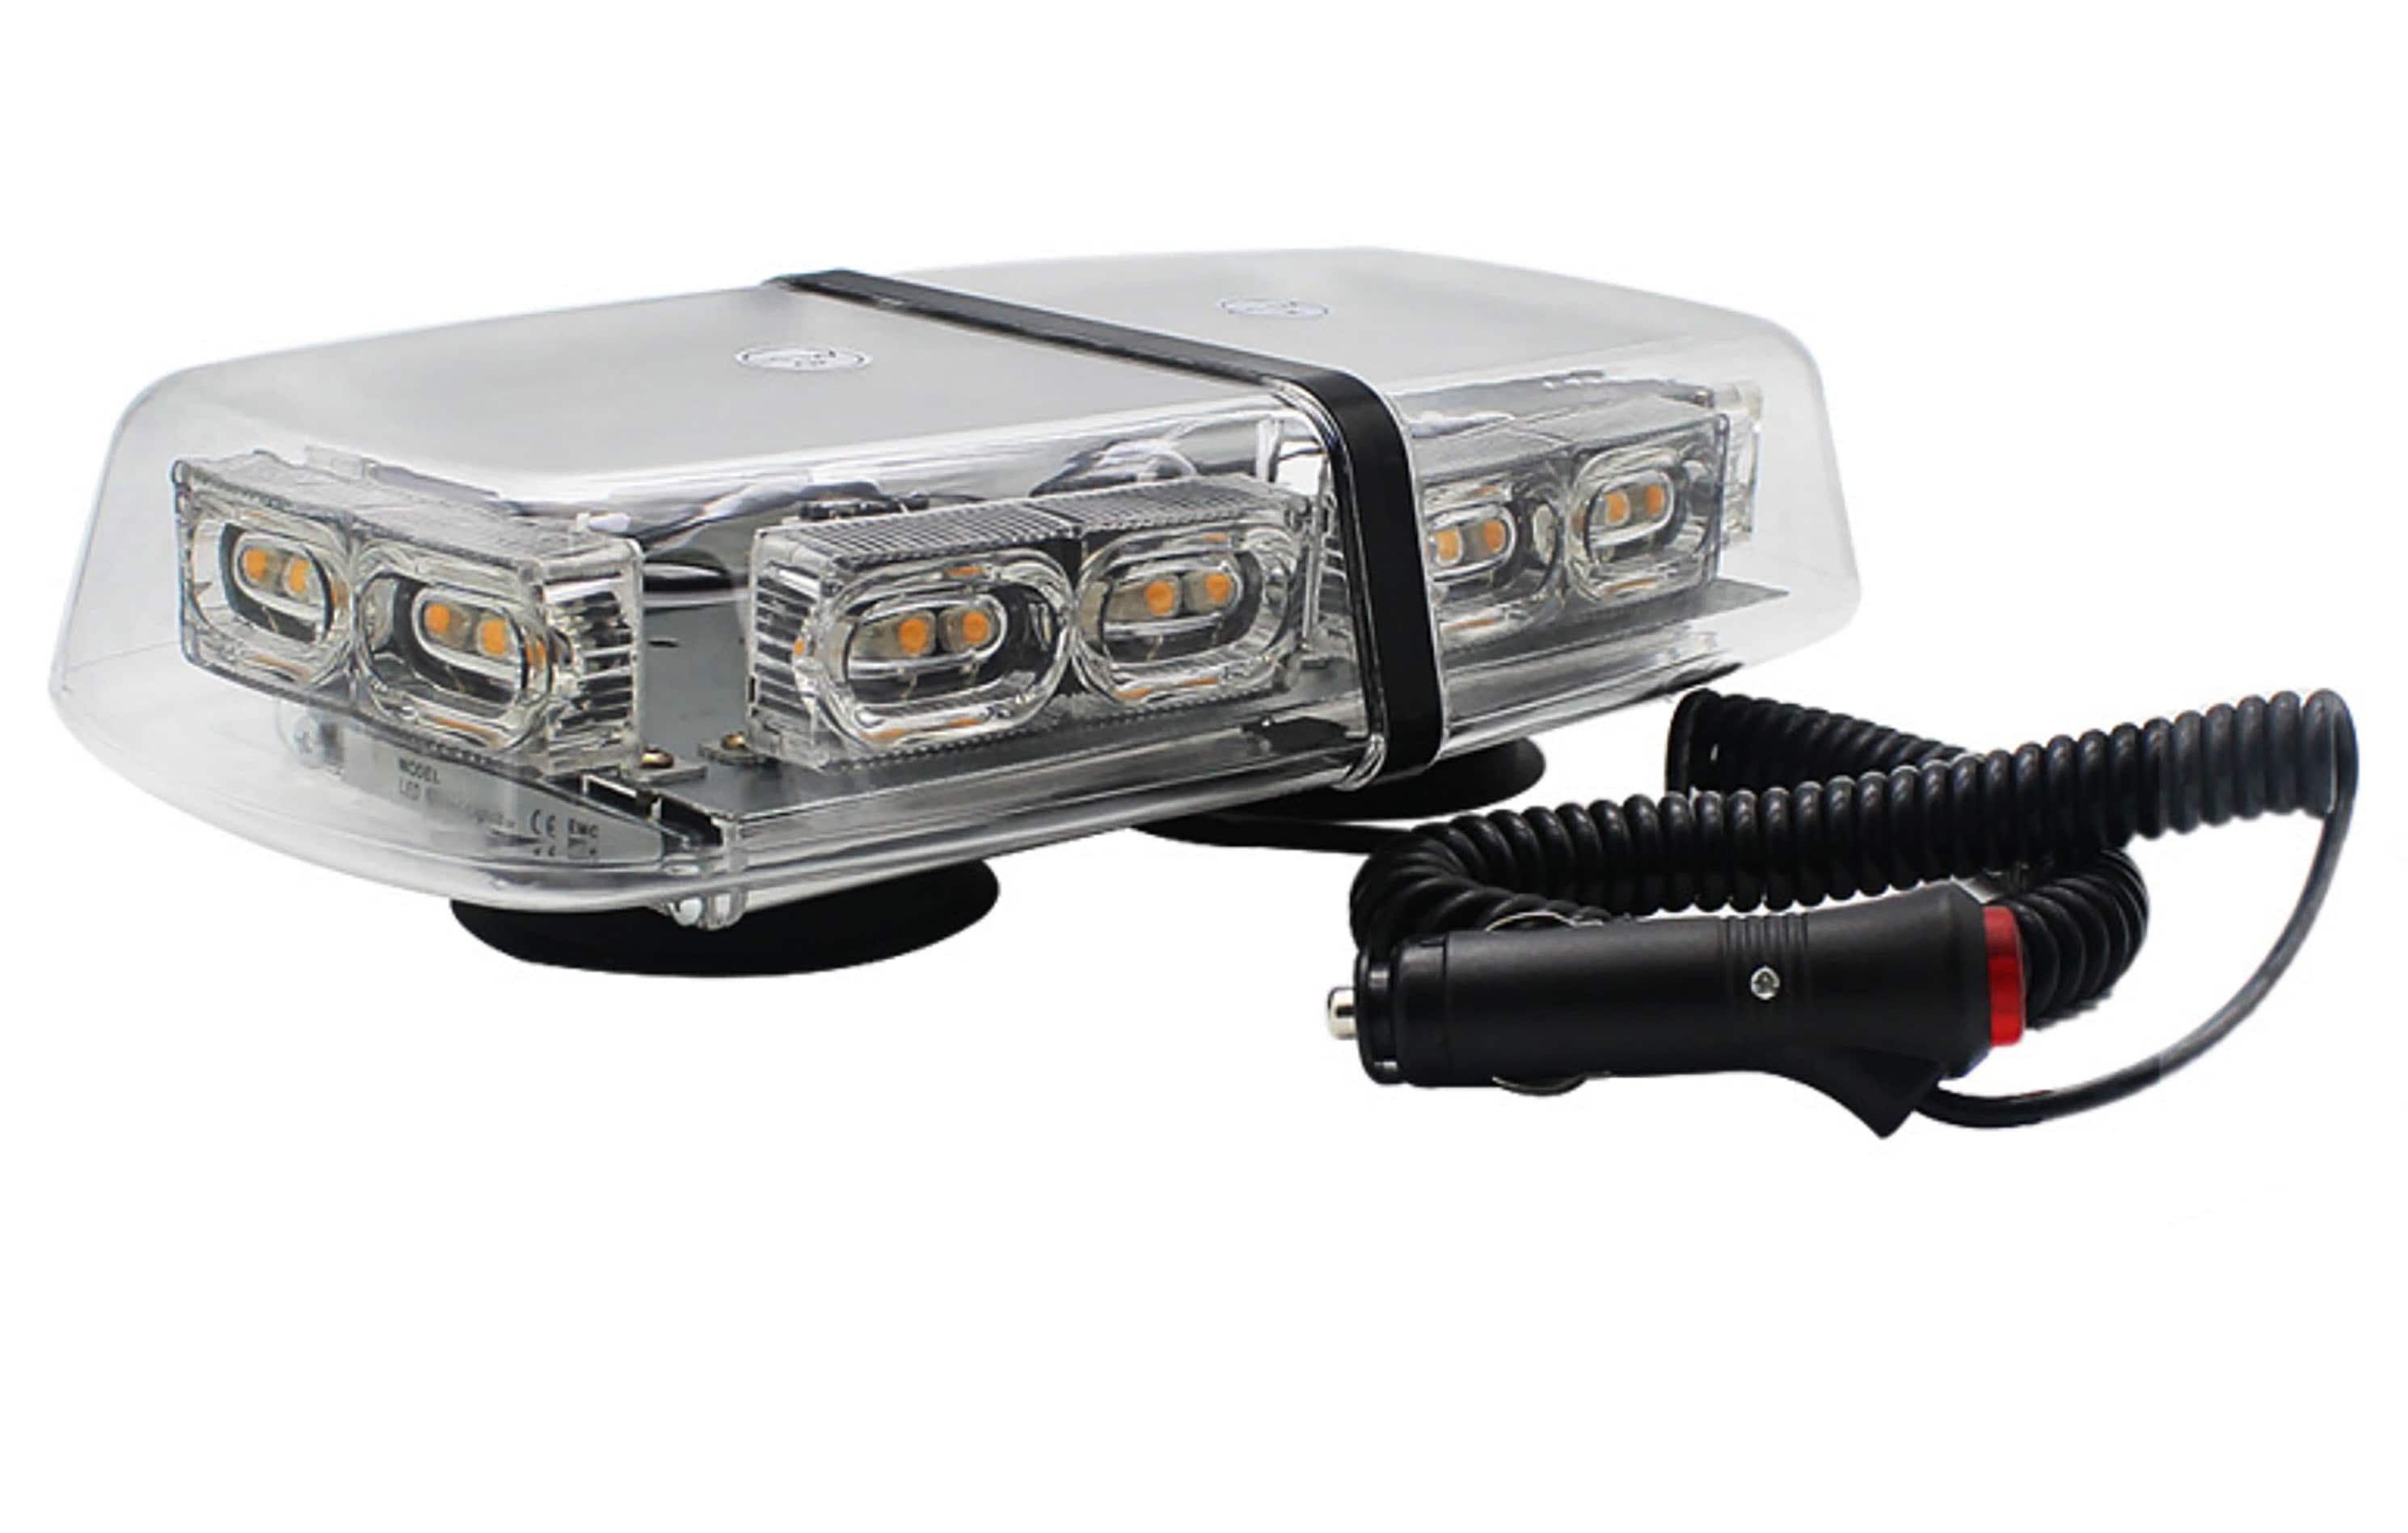 Foxfire Safety This amber strobe warning light is packed with 36 powerful  LEDs and 7 different flash patterns with recall function. This product is  designed to be mounted on top of a